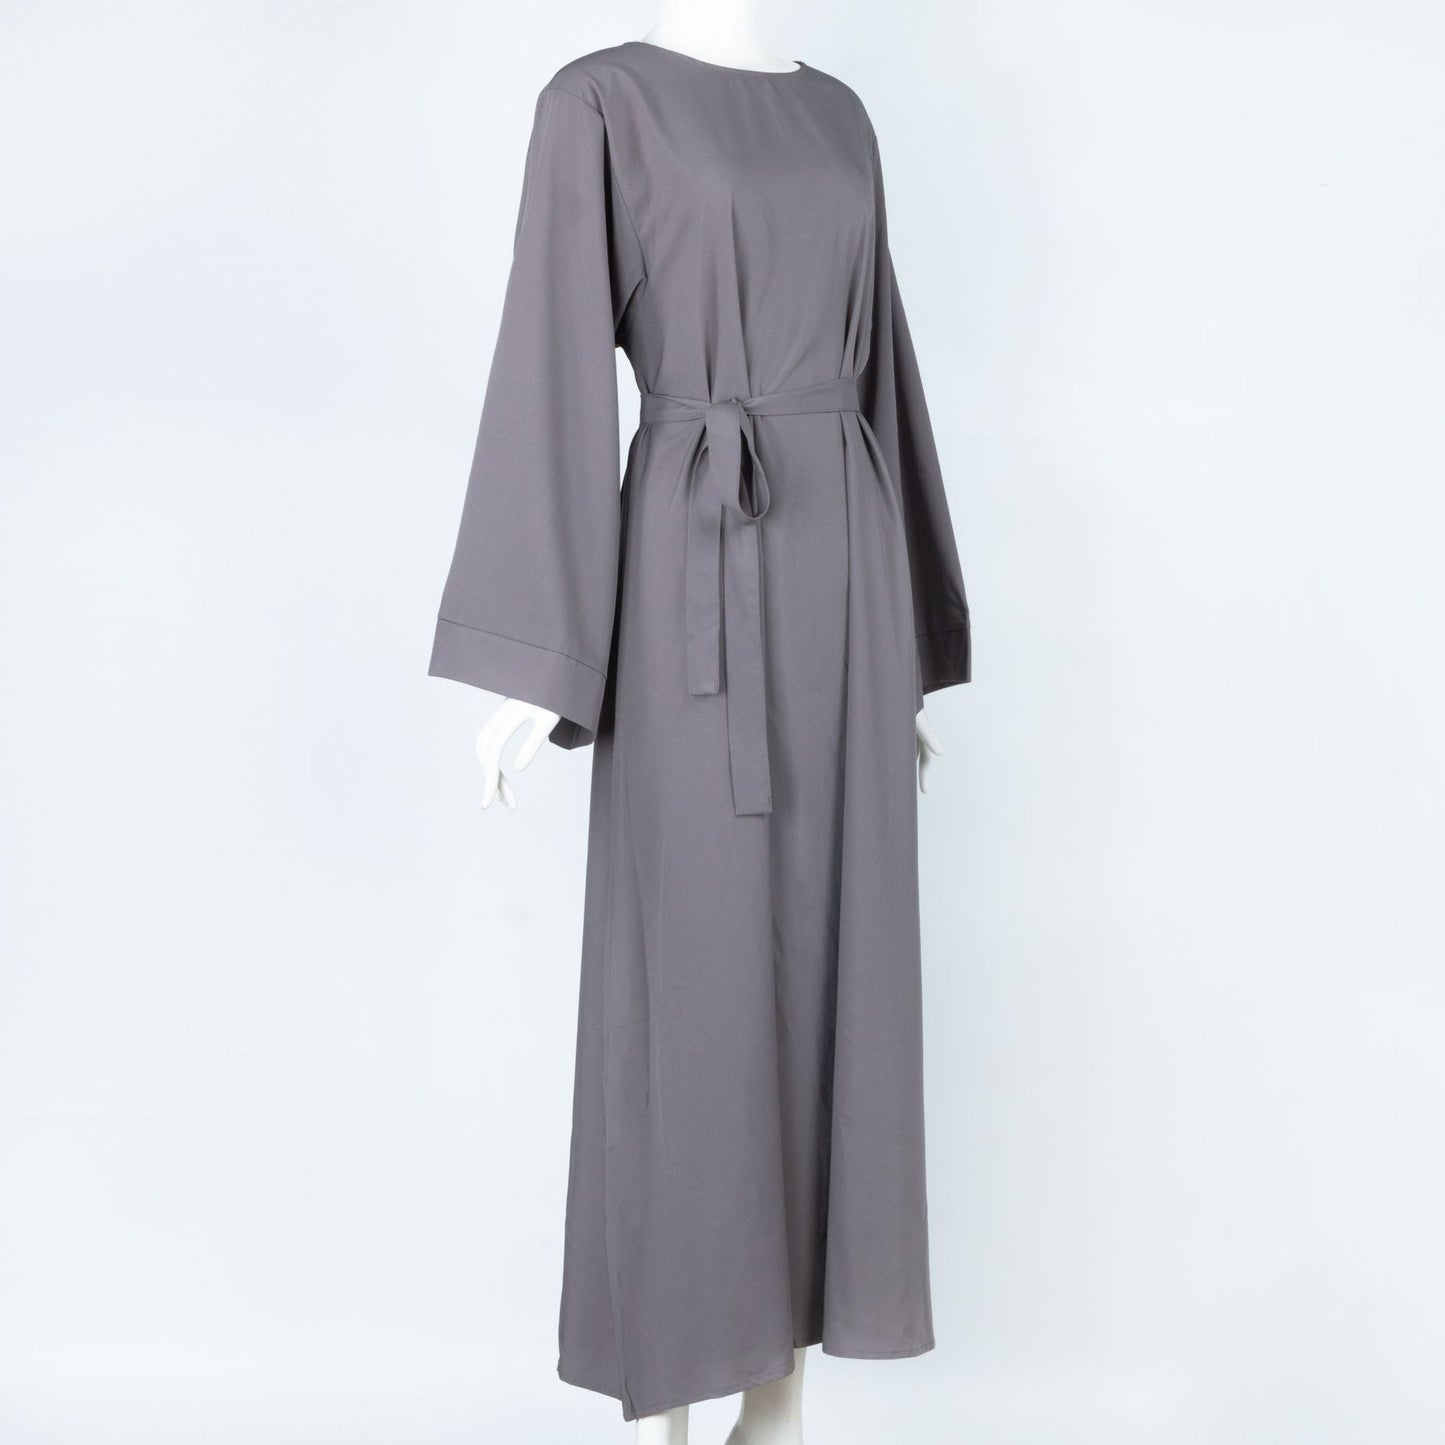 HS0477 Casual abaya solid color airy women's long sleeve round neck maxi dress